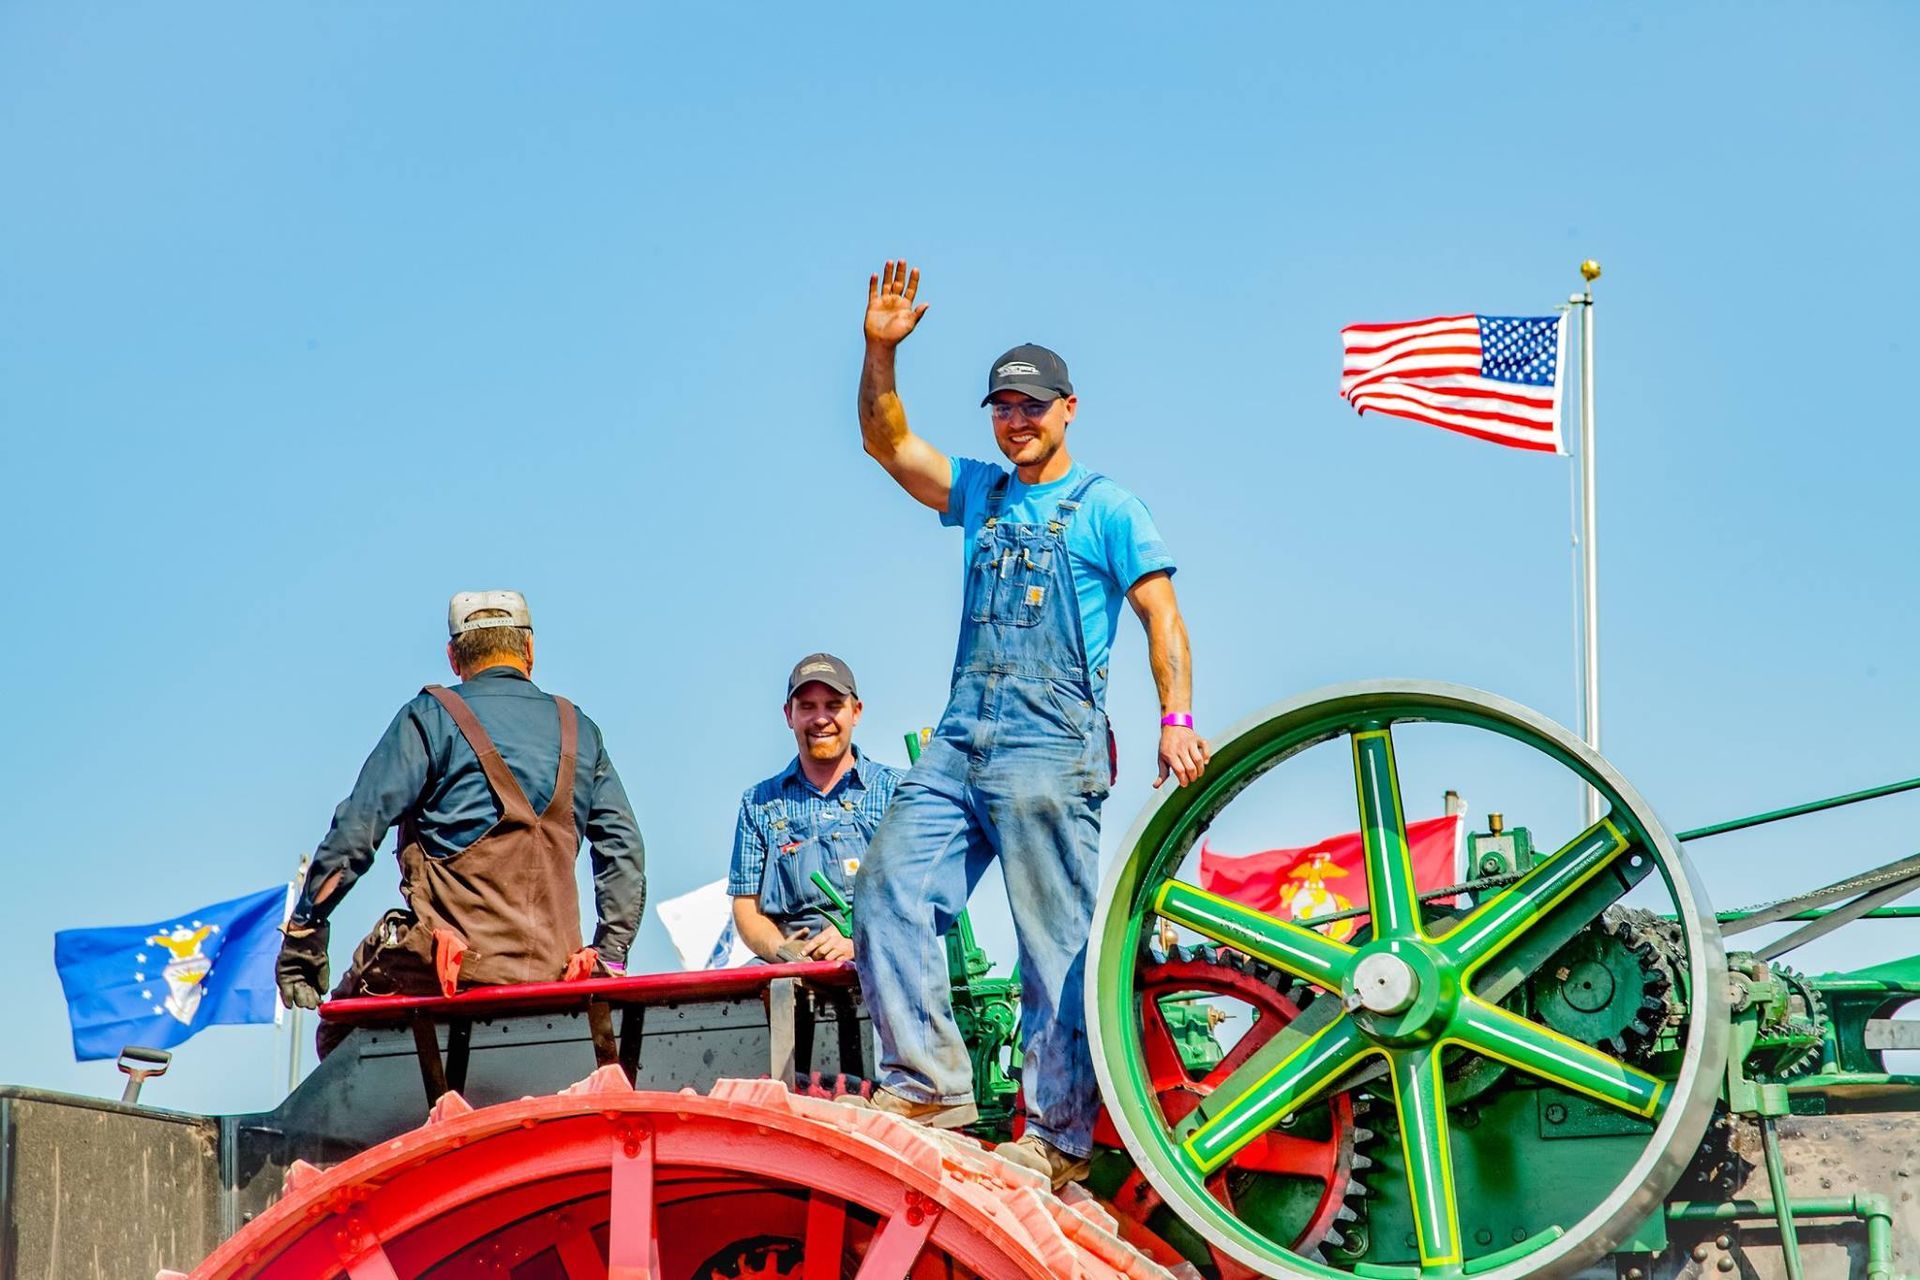 World's Largest Steam Traction Engine, world record in Andover, South Dakota